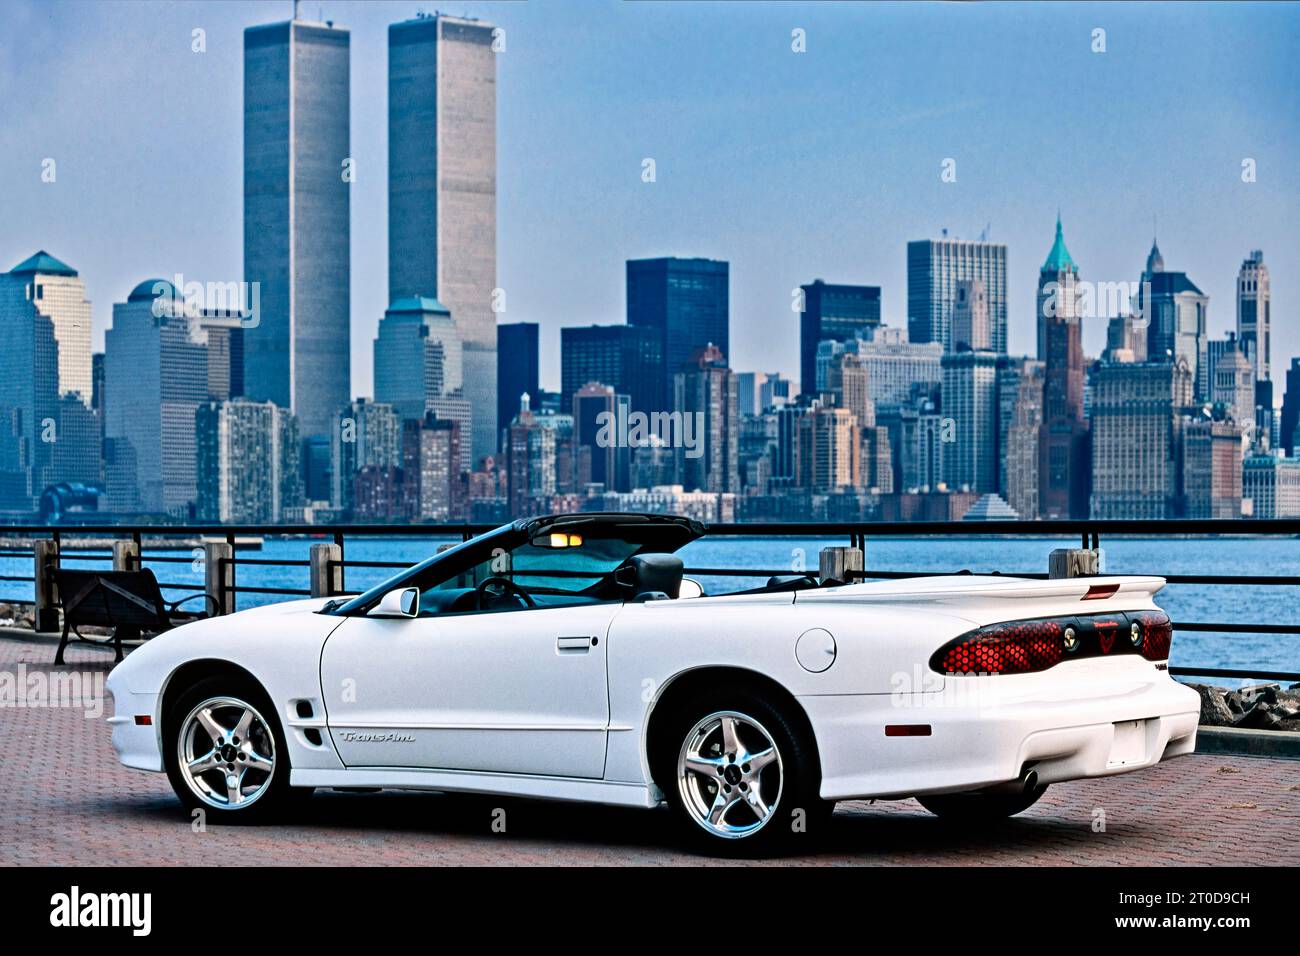 White Pontiac Firebird Trans Am 1999 convertible, series 4 model, parked in front of World Trade Centre skyline, New York, USA Stock Photo